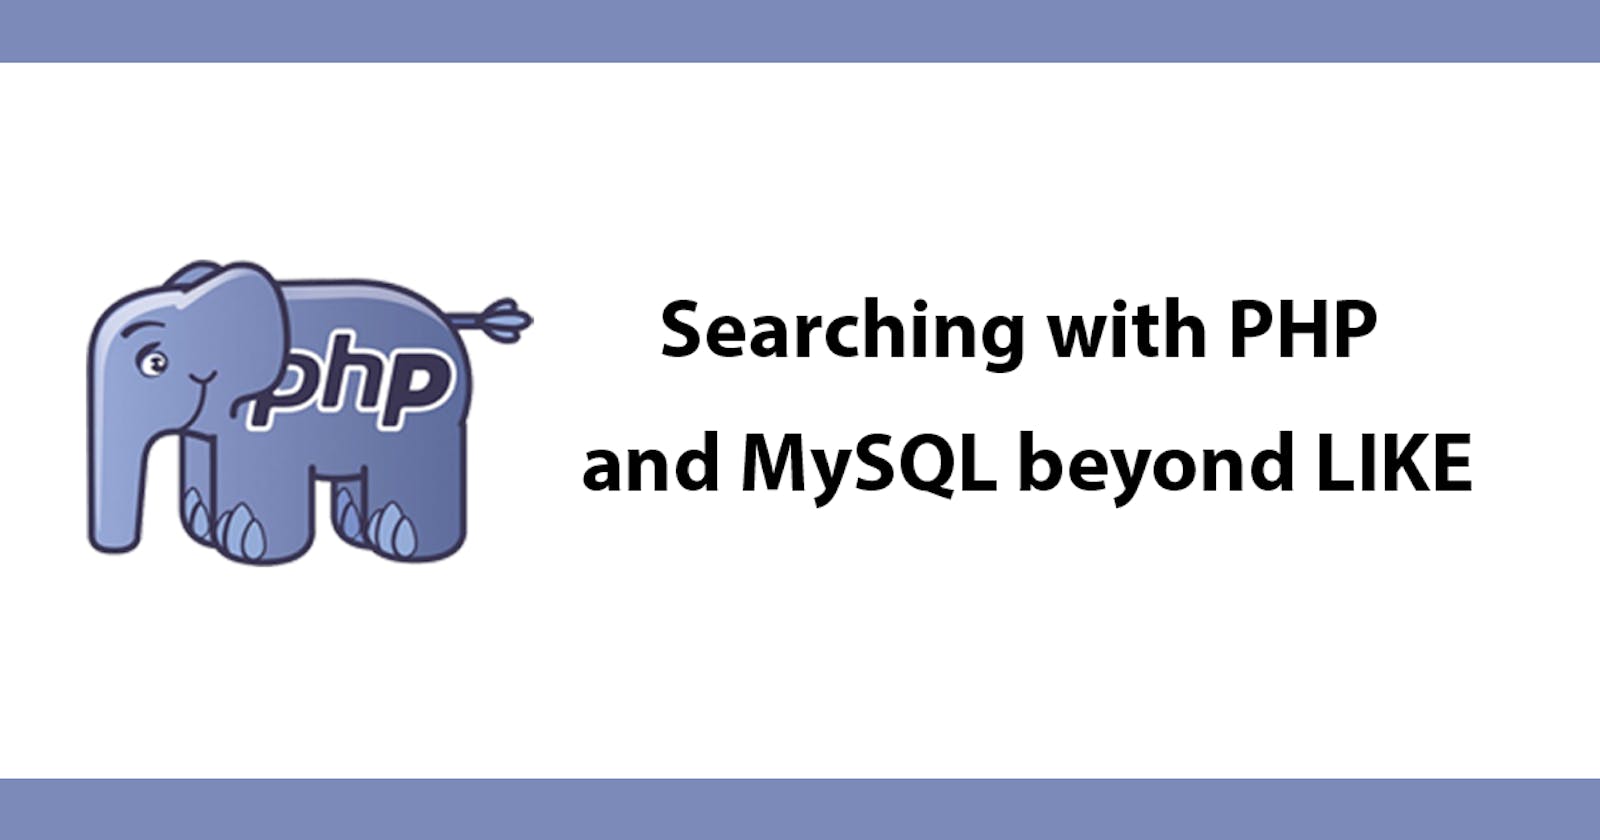 Searching with PHP and MySQL beyond LIKE